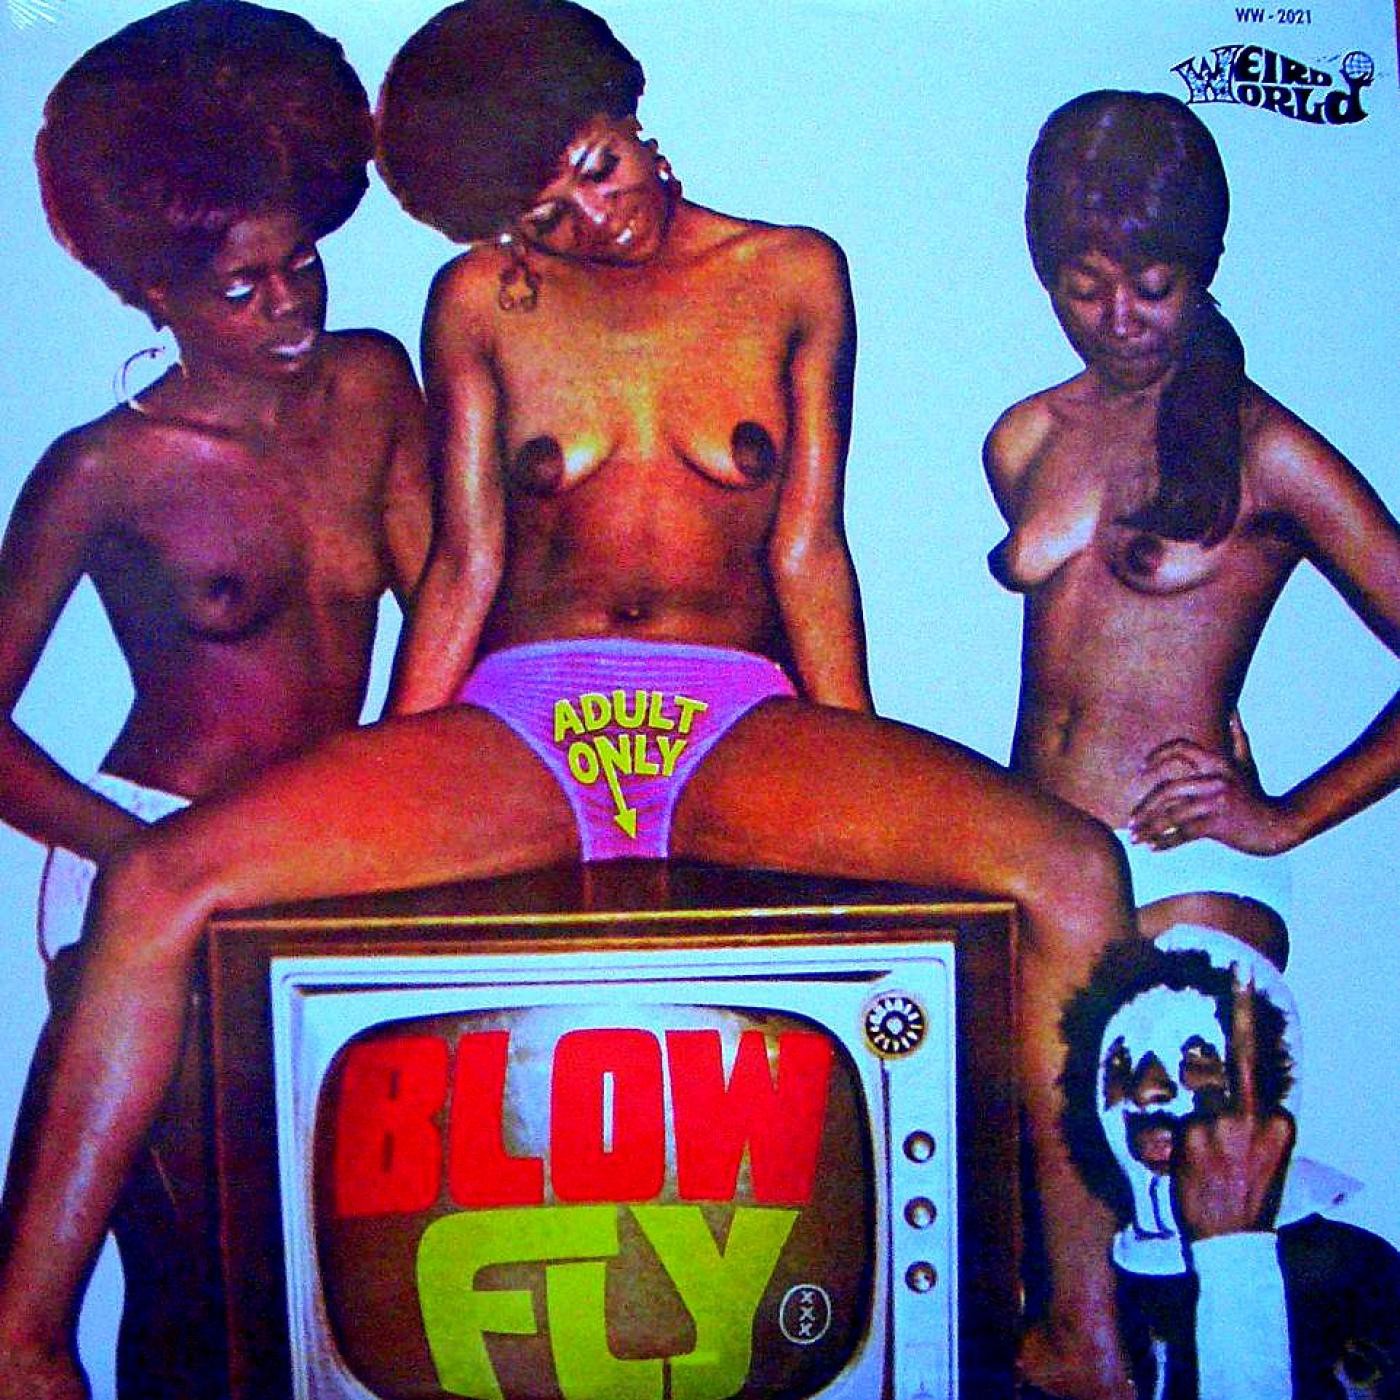 Blowfly girl pictures